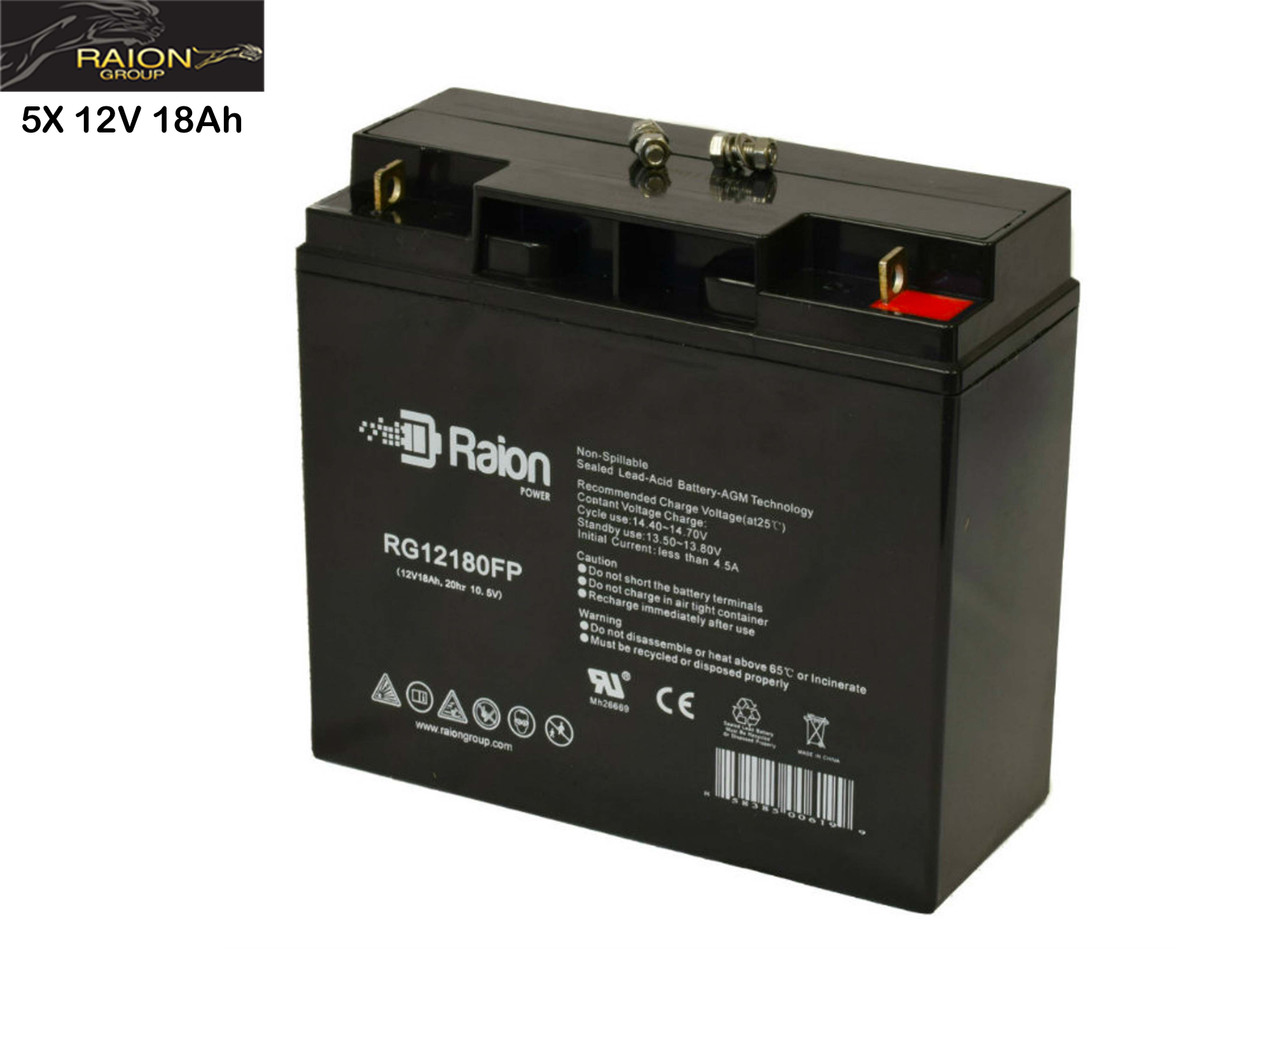 Raion Power Replacement 12V 18Ah Battery for Volt Canada Wind - 5 Pack